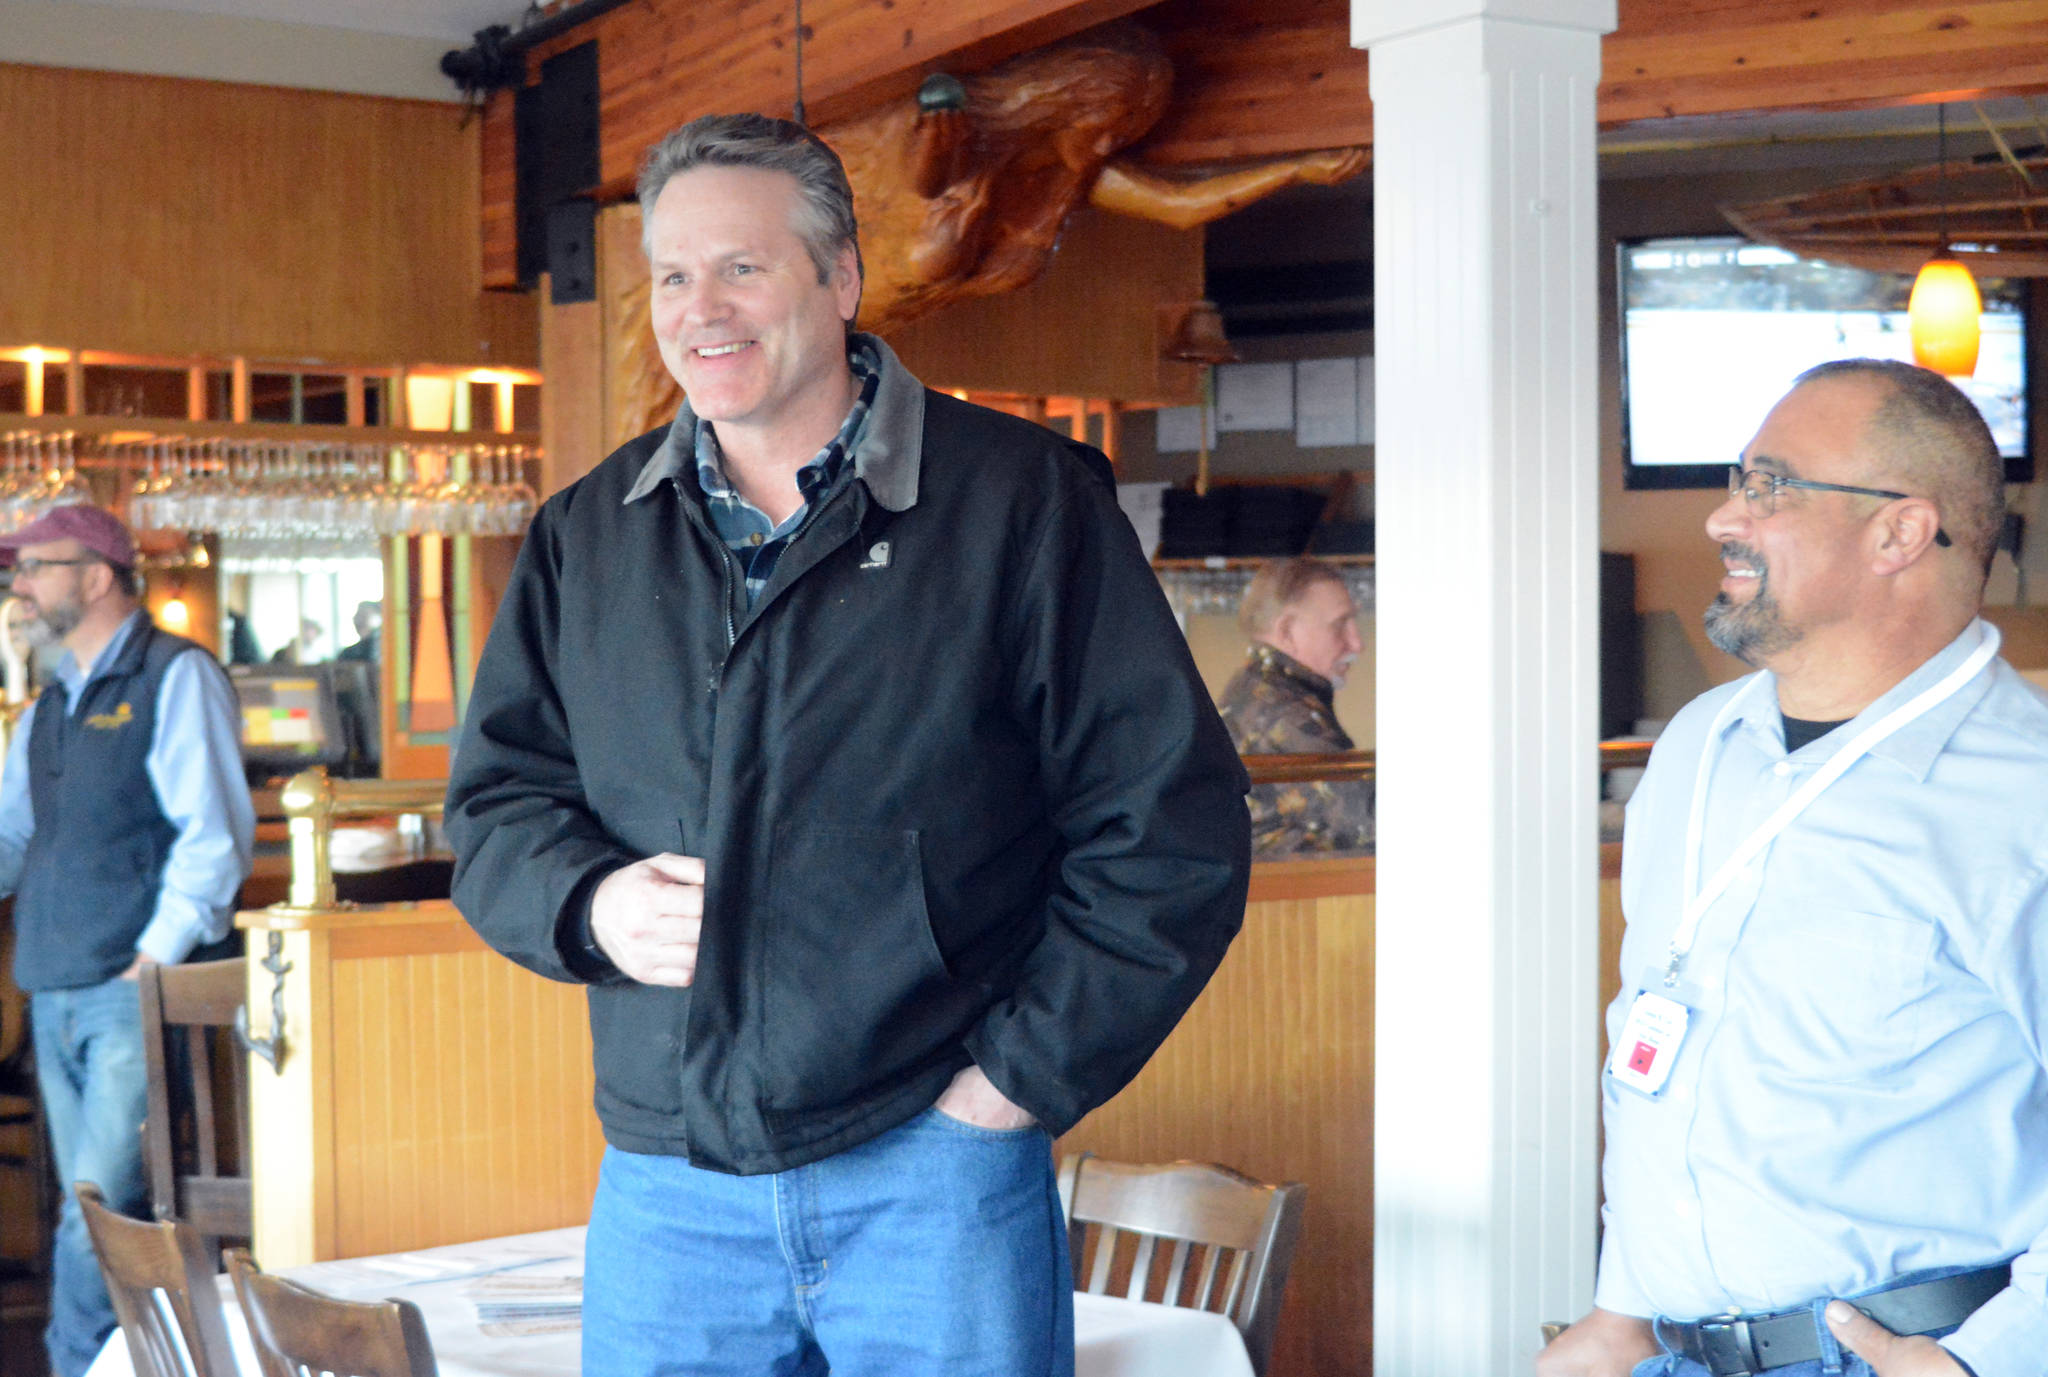 Republican Party candidate Mike Dunleavy, left, speaks Thursday, March 1, 2018 at Land’s End Resort in Homer, Alaska, as John Cox of Anchor Point, right, listens. Cox is running for the Republican Party nomination for District 31 representative. (Photo by Michael Armstrong/Homer News)